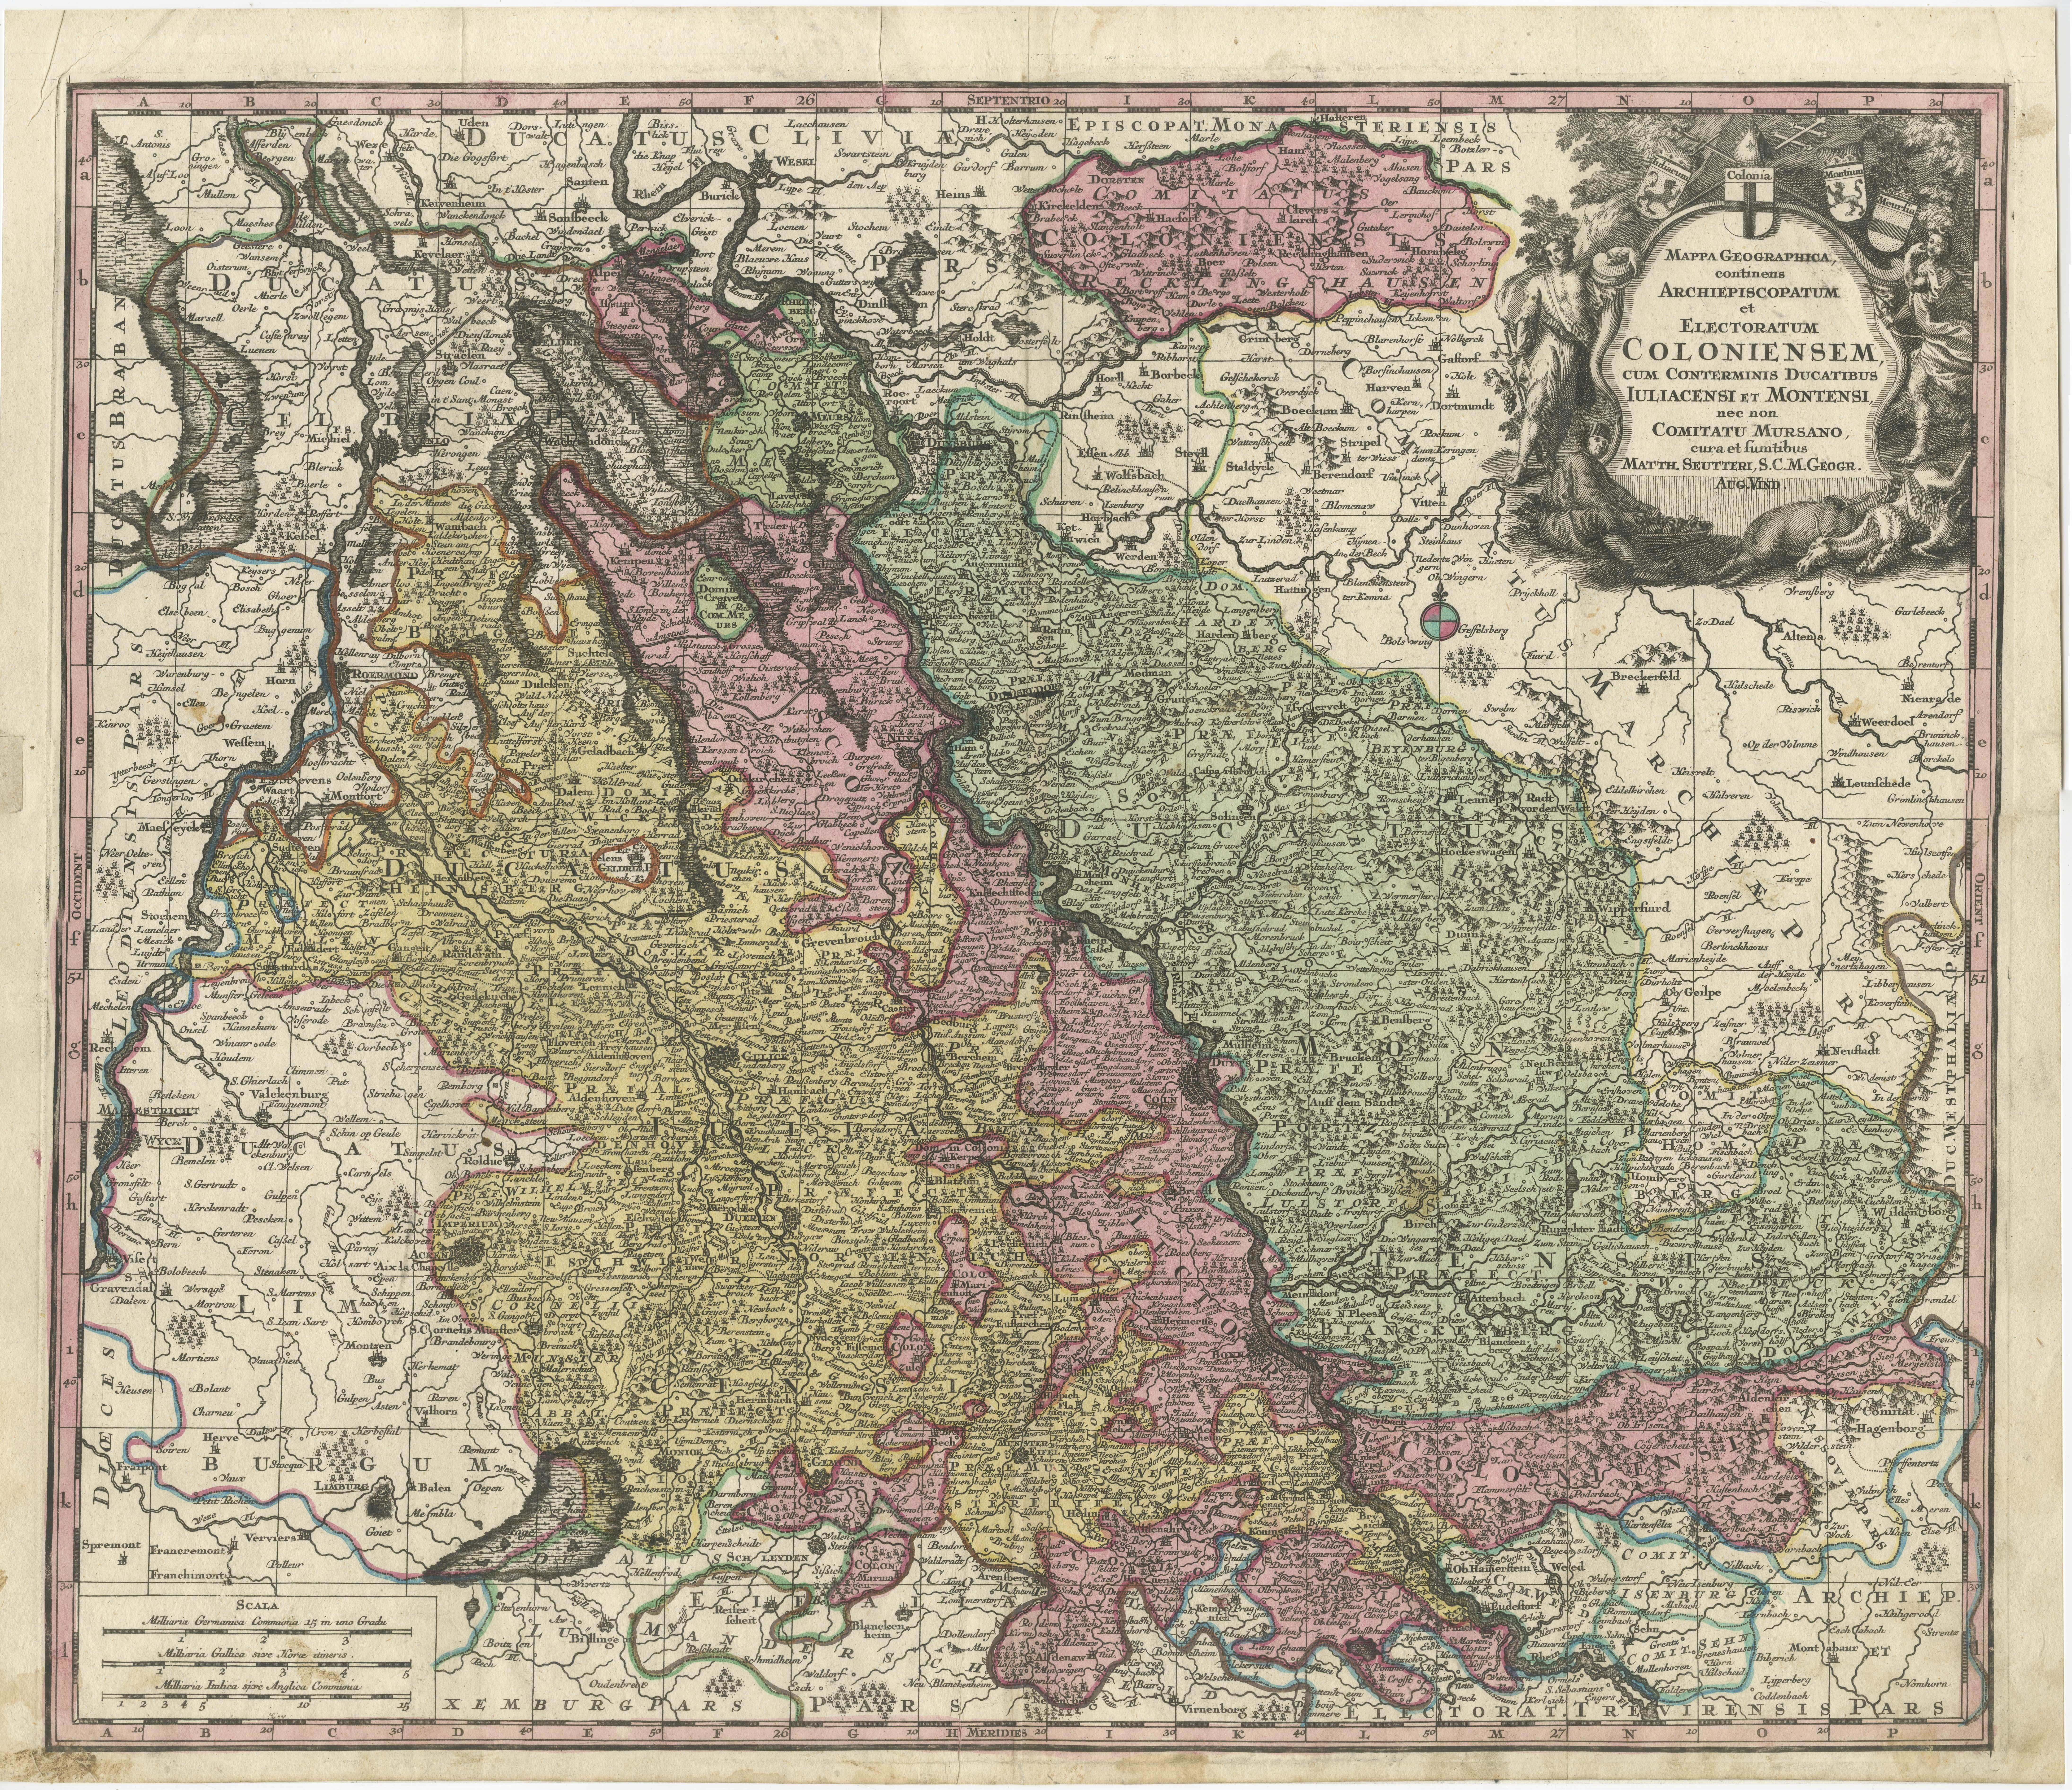 Antique map titled 'Mappa Geographica continens Archiepiscopatum et Electoratum Coloniensem (..)'. Decorative map of region on either side of the Central Rhine River, showing Dusseldorf, Cologne, Bonn, etc. Decorative cartouche. Published by M.